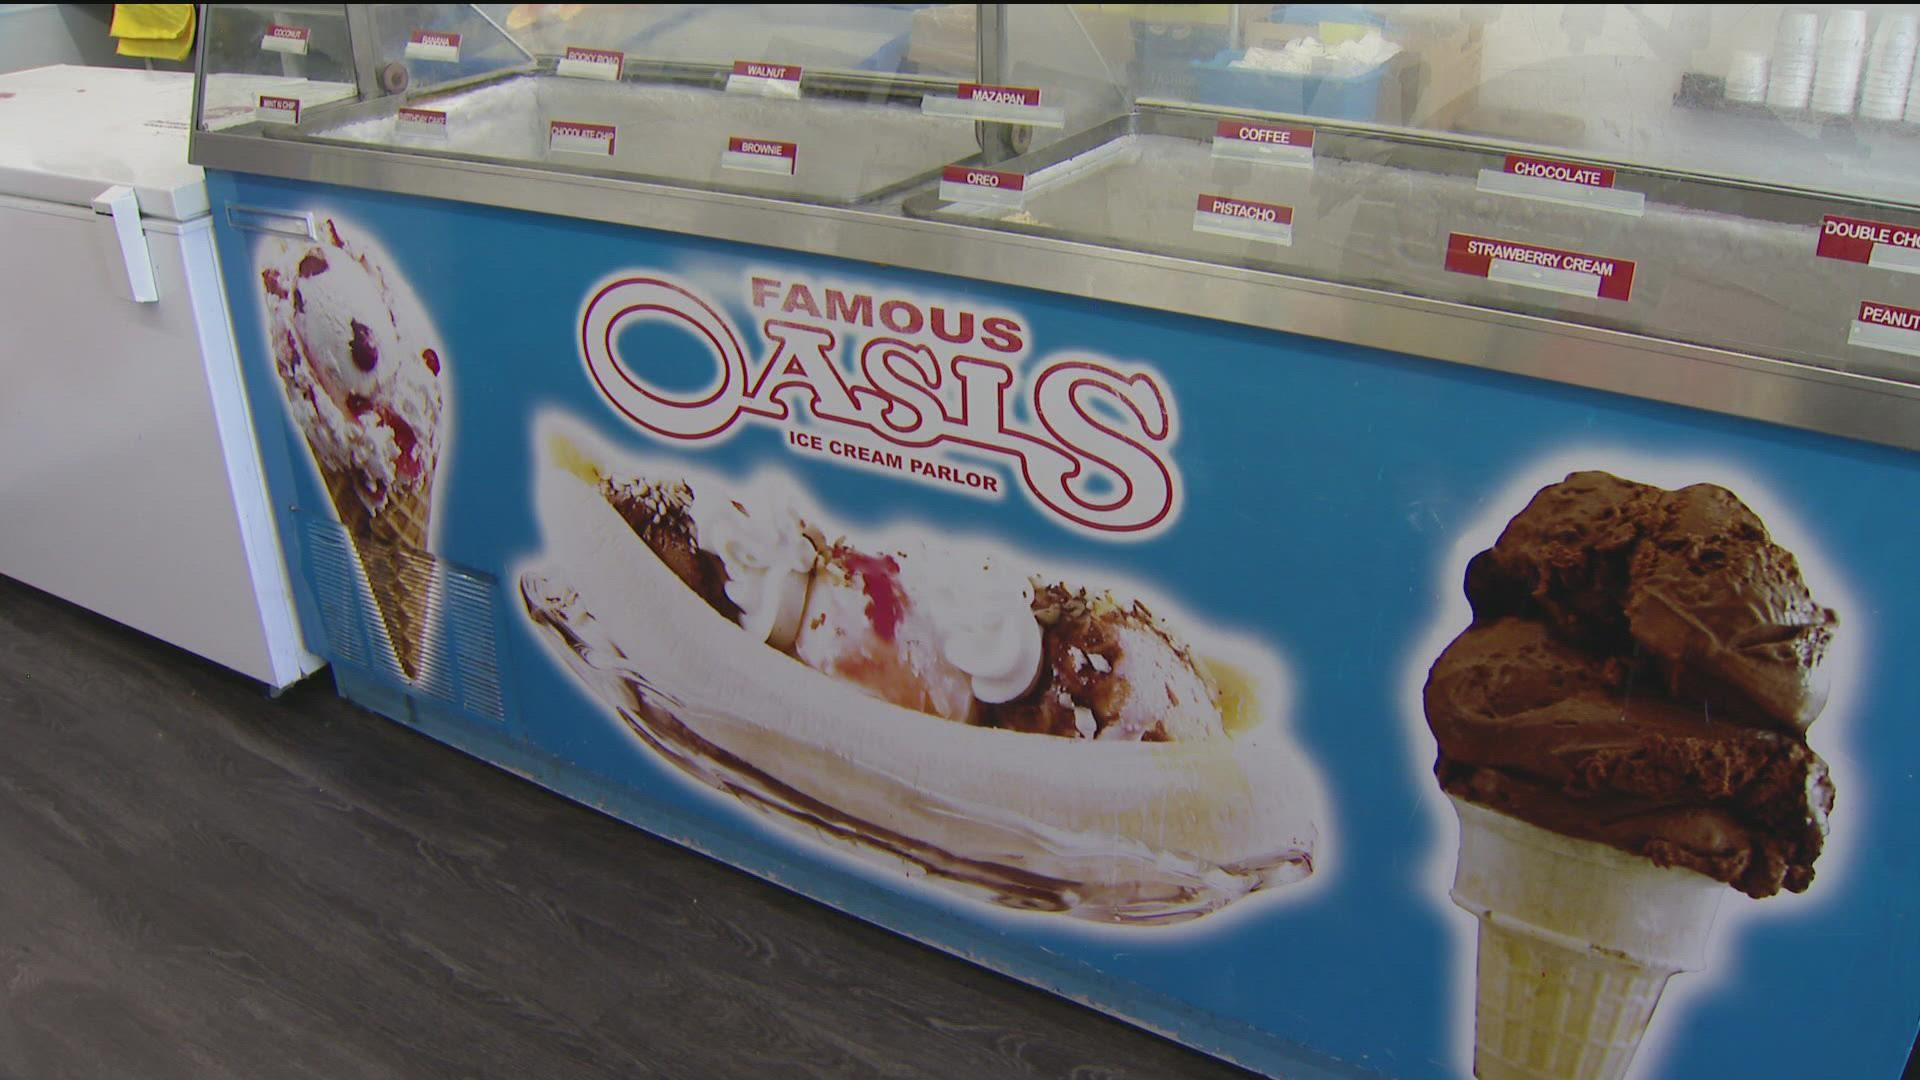 Famous Oasis Ice Cream Parlor brought the business from Mexico to South San Diego back in 1978.